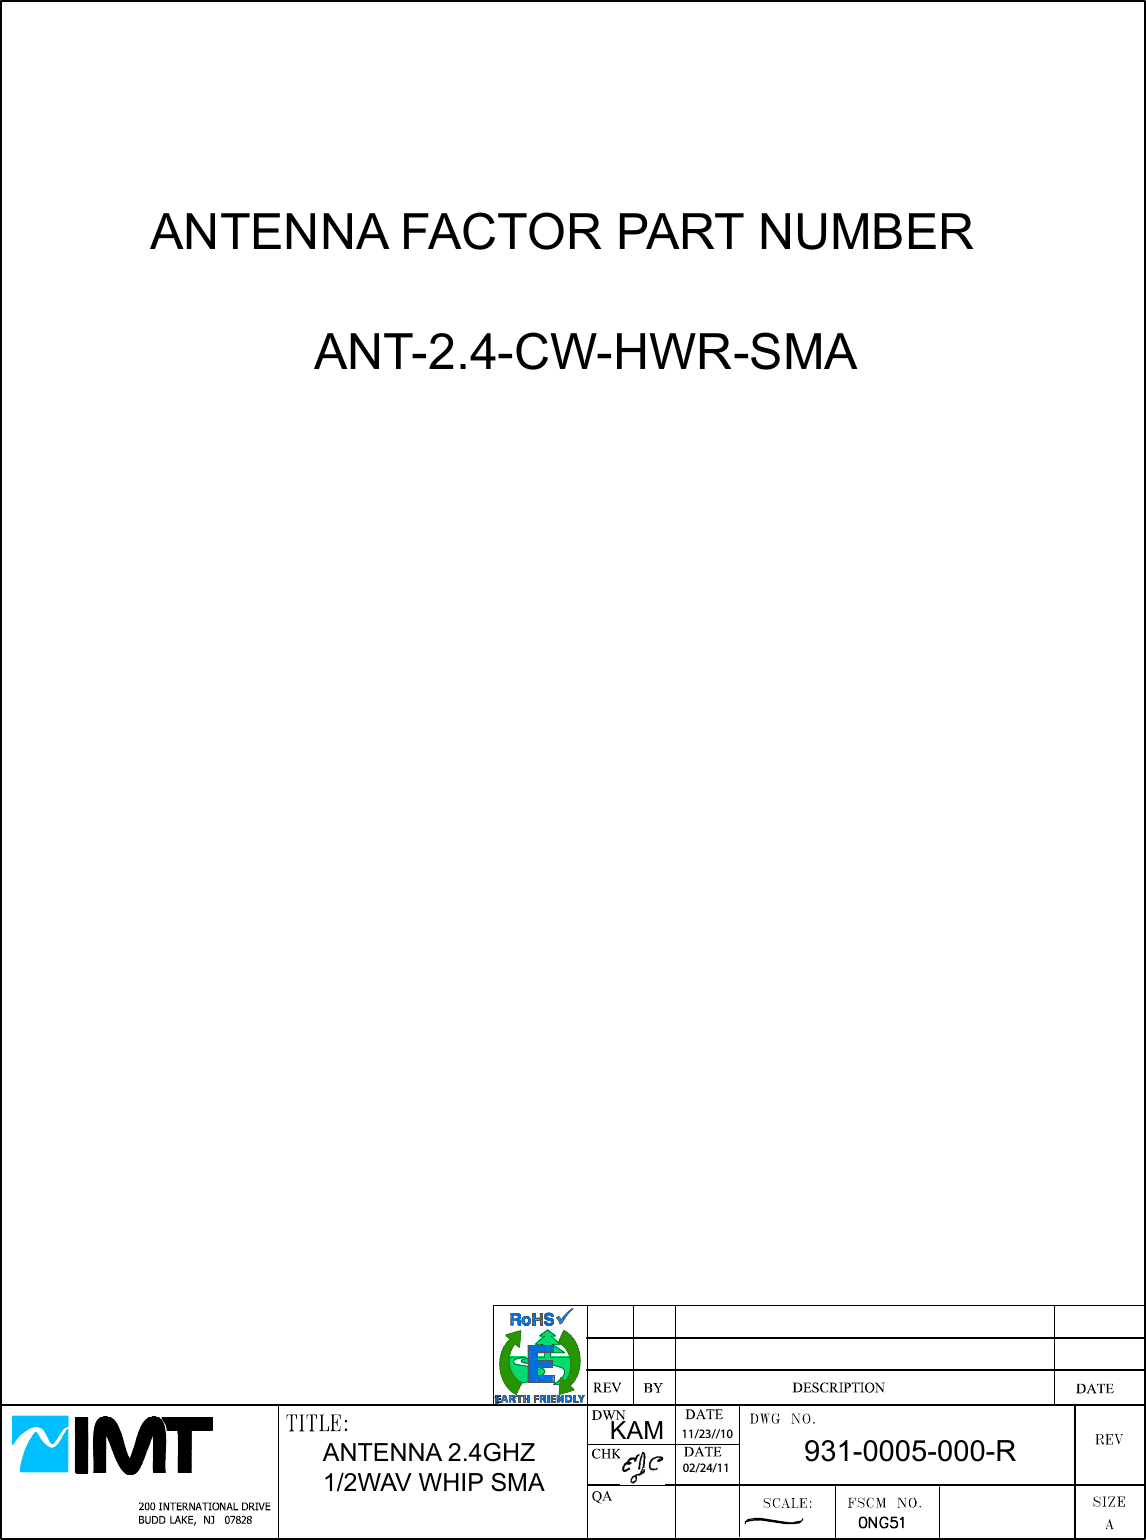 ANTENNA FACTOR PART NUMBER            ANT-2.4-CW-HWR-SMA                      931-0005-000-RANTENNA 2.4GHZ 1/2WAV WHIP SMAKAM 11/23//1002/24/11